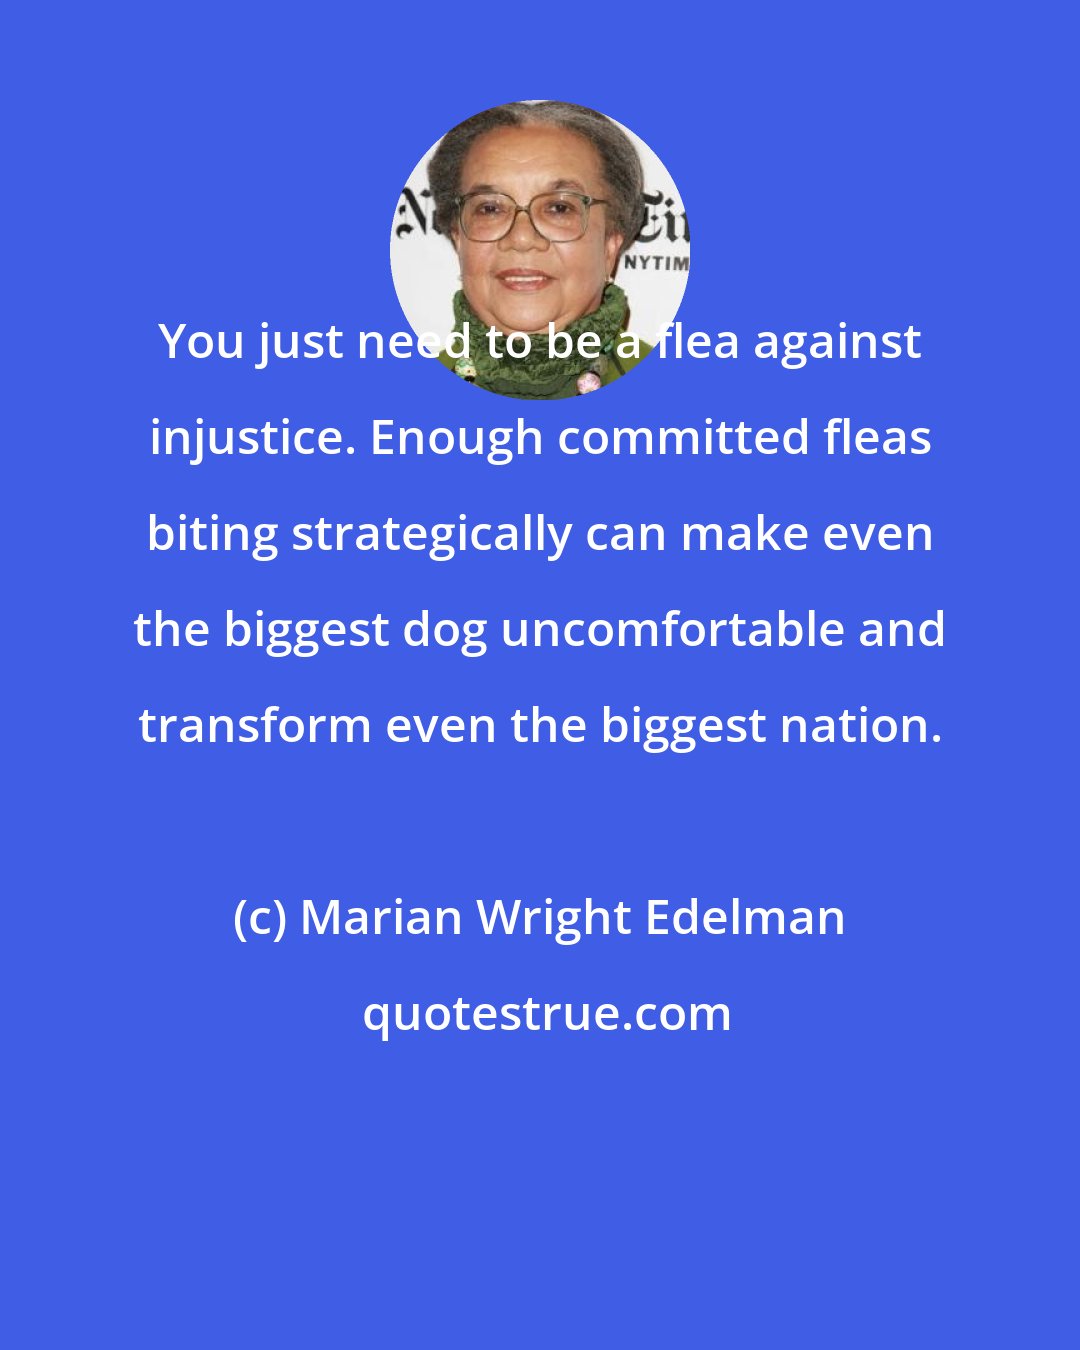 Marian Wright Edelman: You just need to be a flea against injustice. Enough committed fleas biting strategically can make even the biggest dog uncomfortable and transform even the biggest nation.